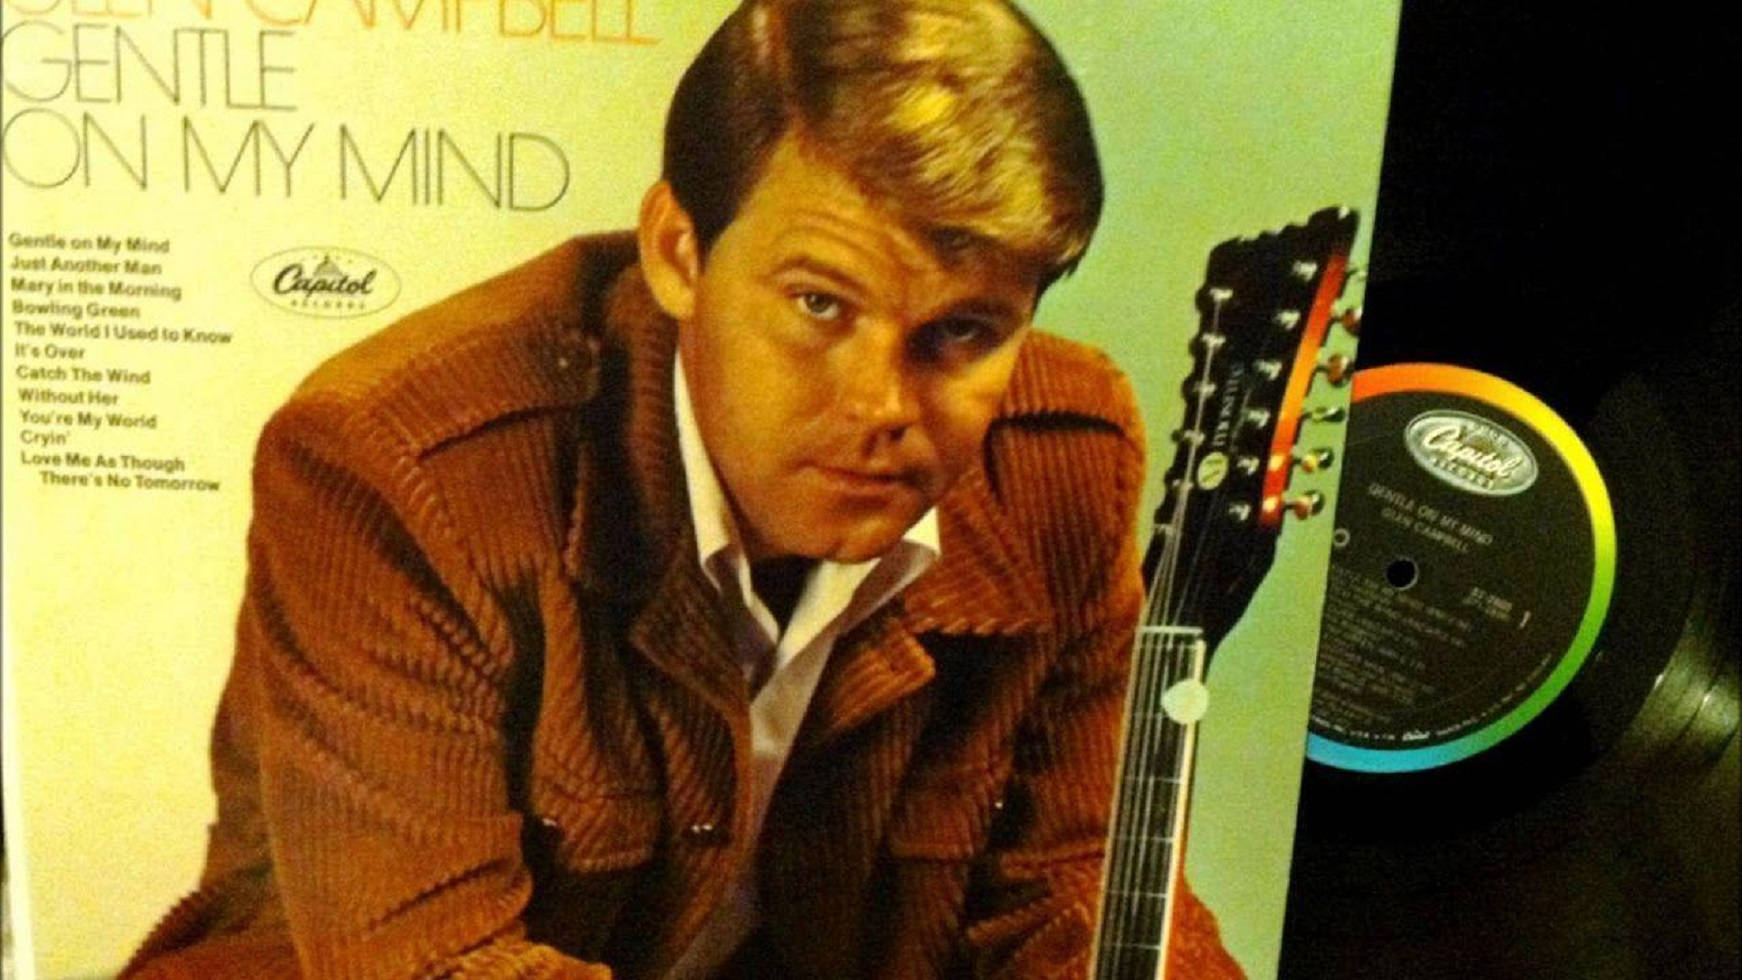 Glen Campbell On His Gentle On My Mind Album Cover Wallpaper